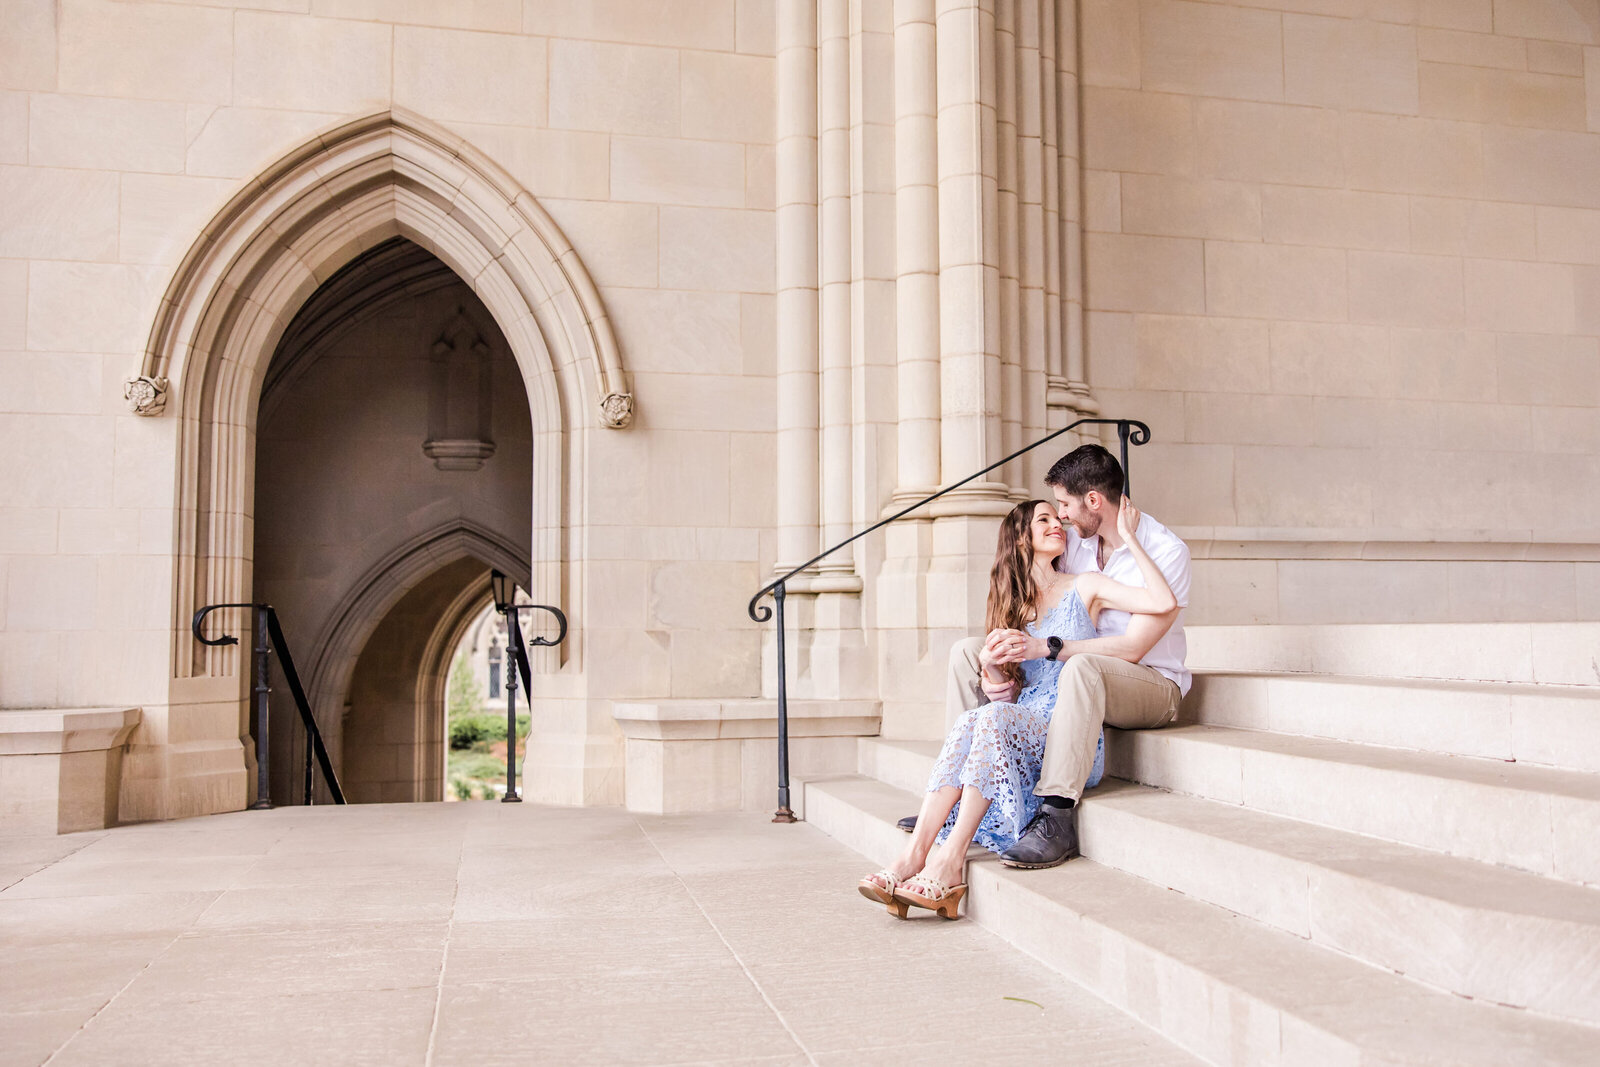 39National_Cathedral_Bishops_Garden_Engagement_Photos_Photographer_Witt18 copy